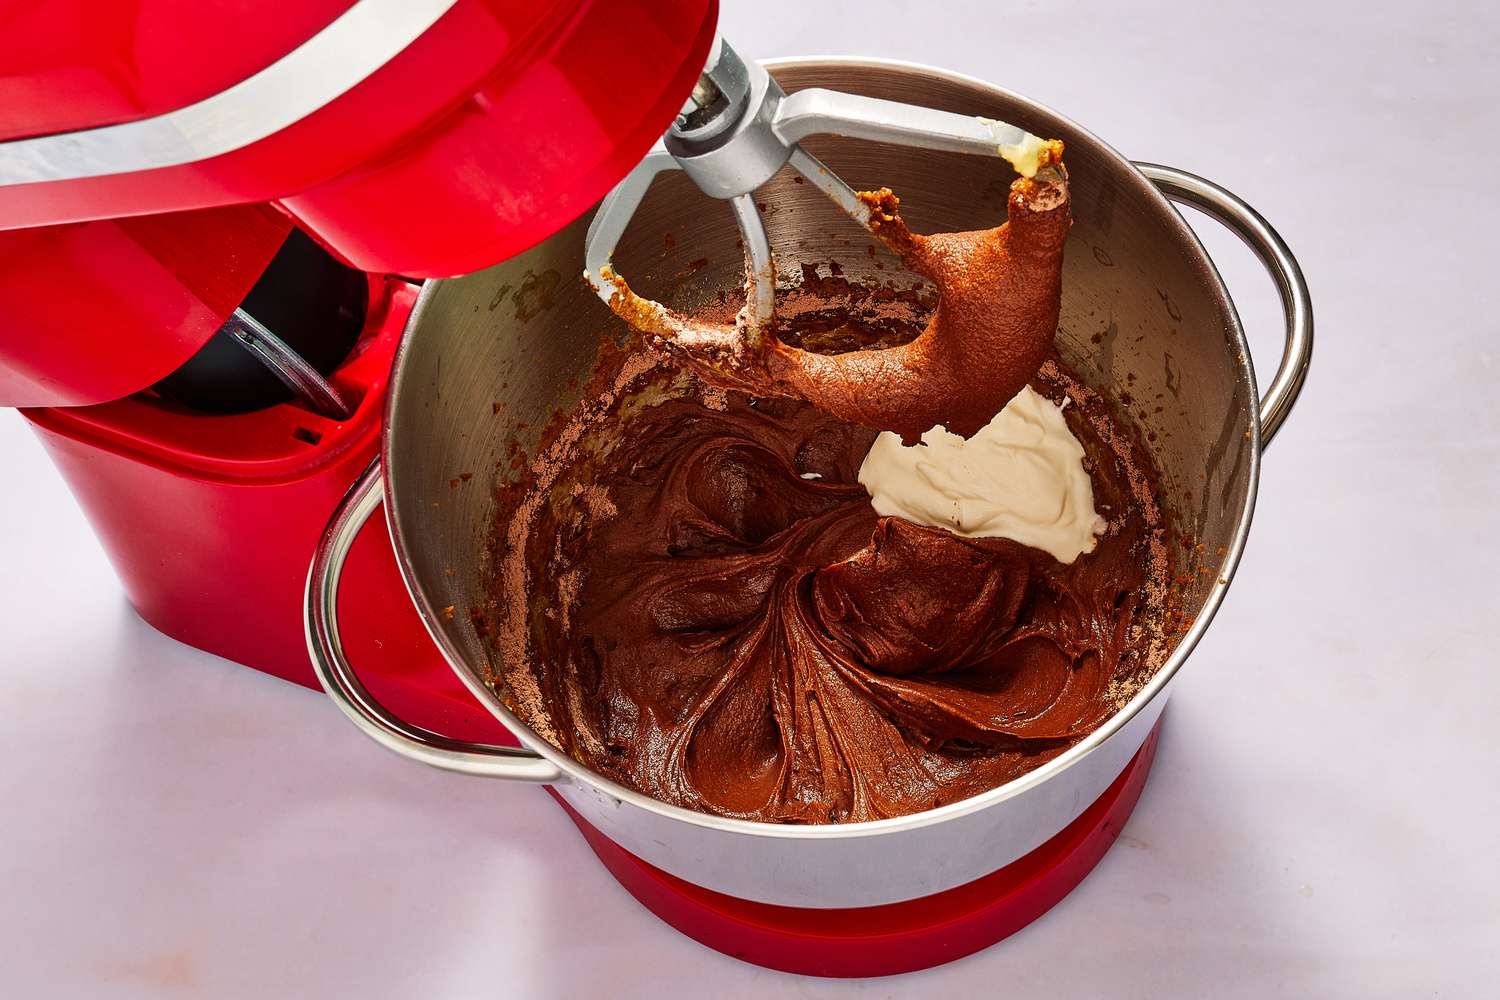 sour cream added to bowl of stand mixer with chocolate cake batter